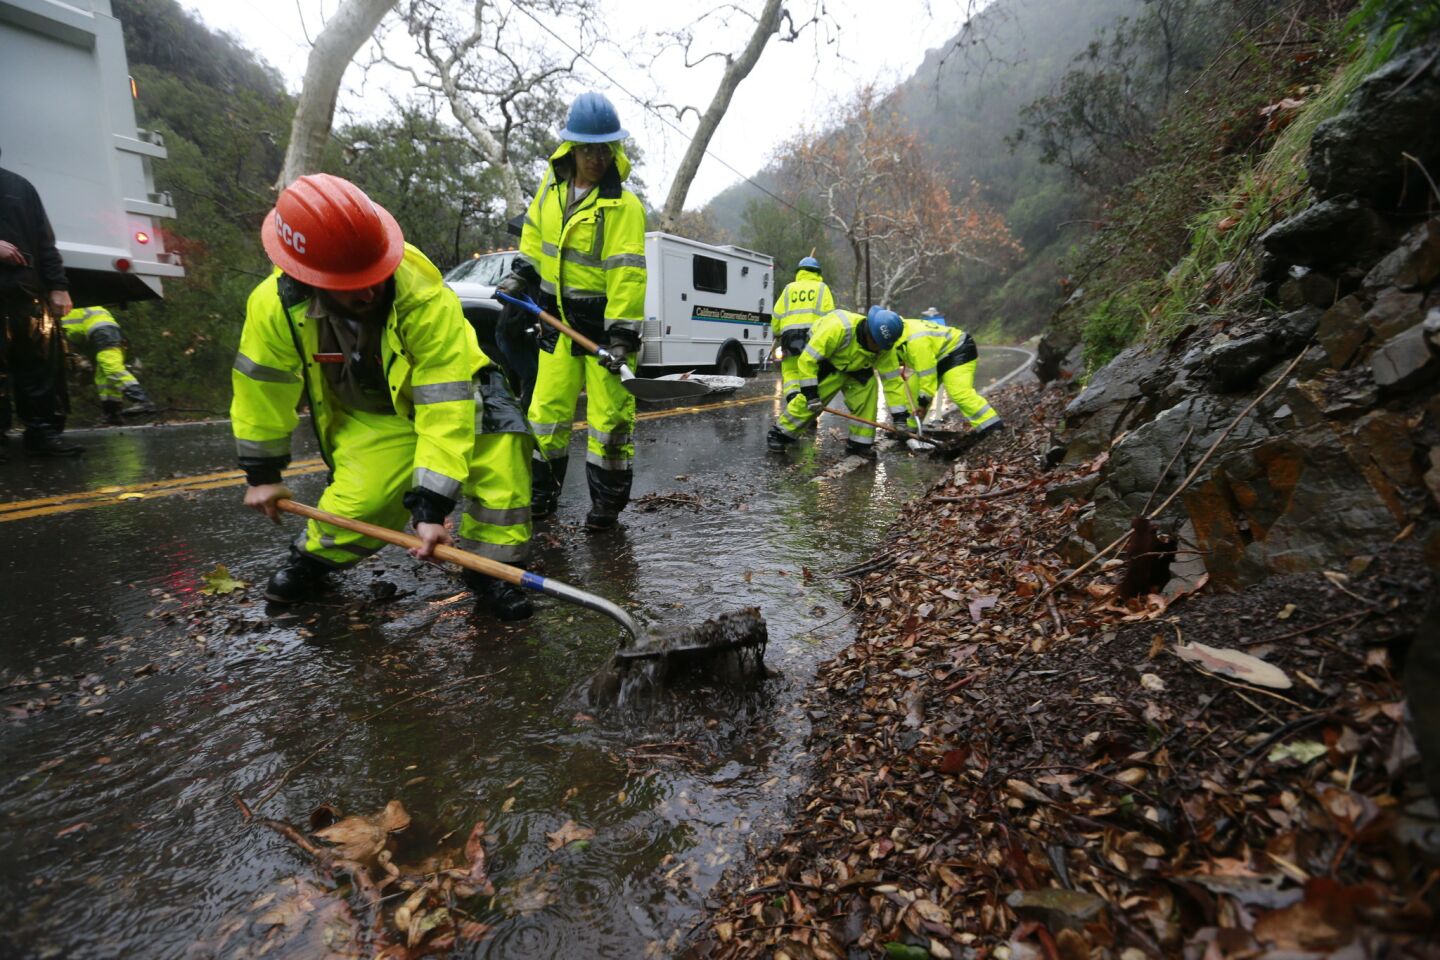 Members of the California Conservation Corps clear drains along Silverado Canyon Road in Orange County, Calif.